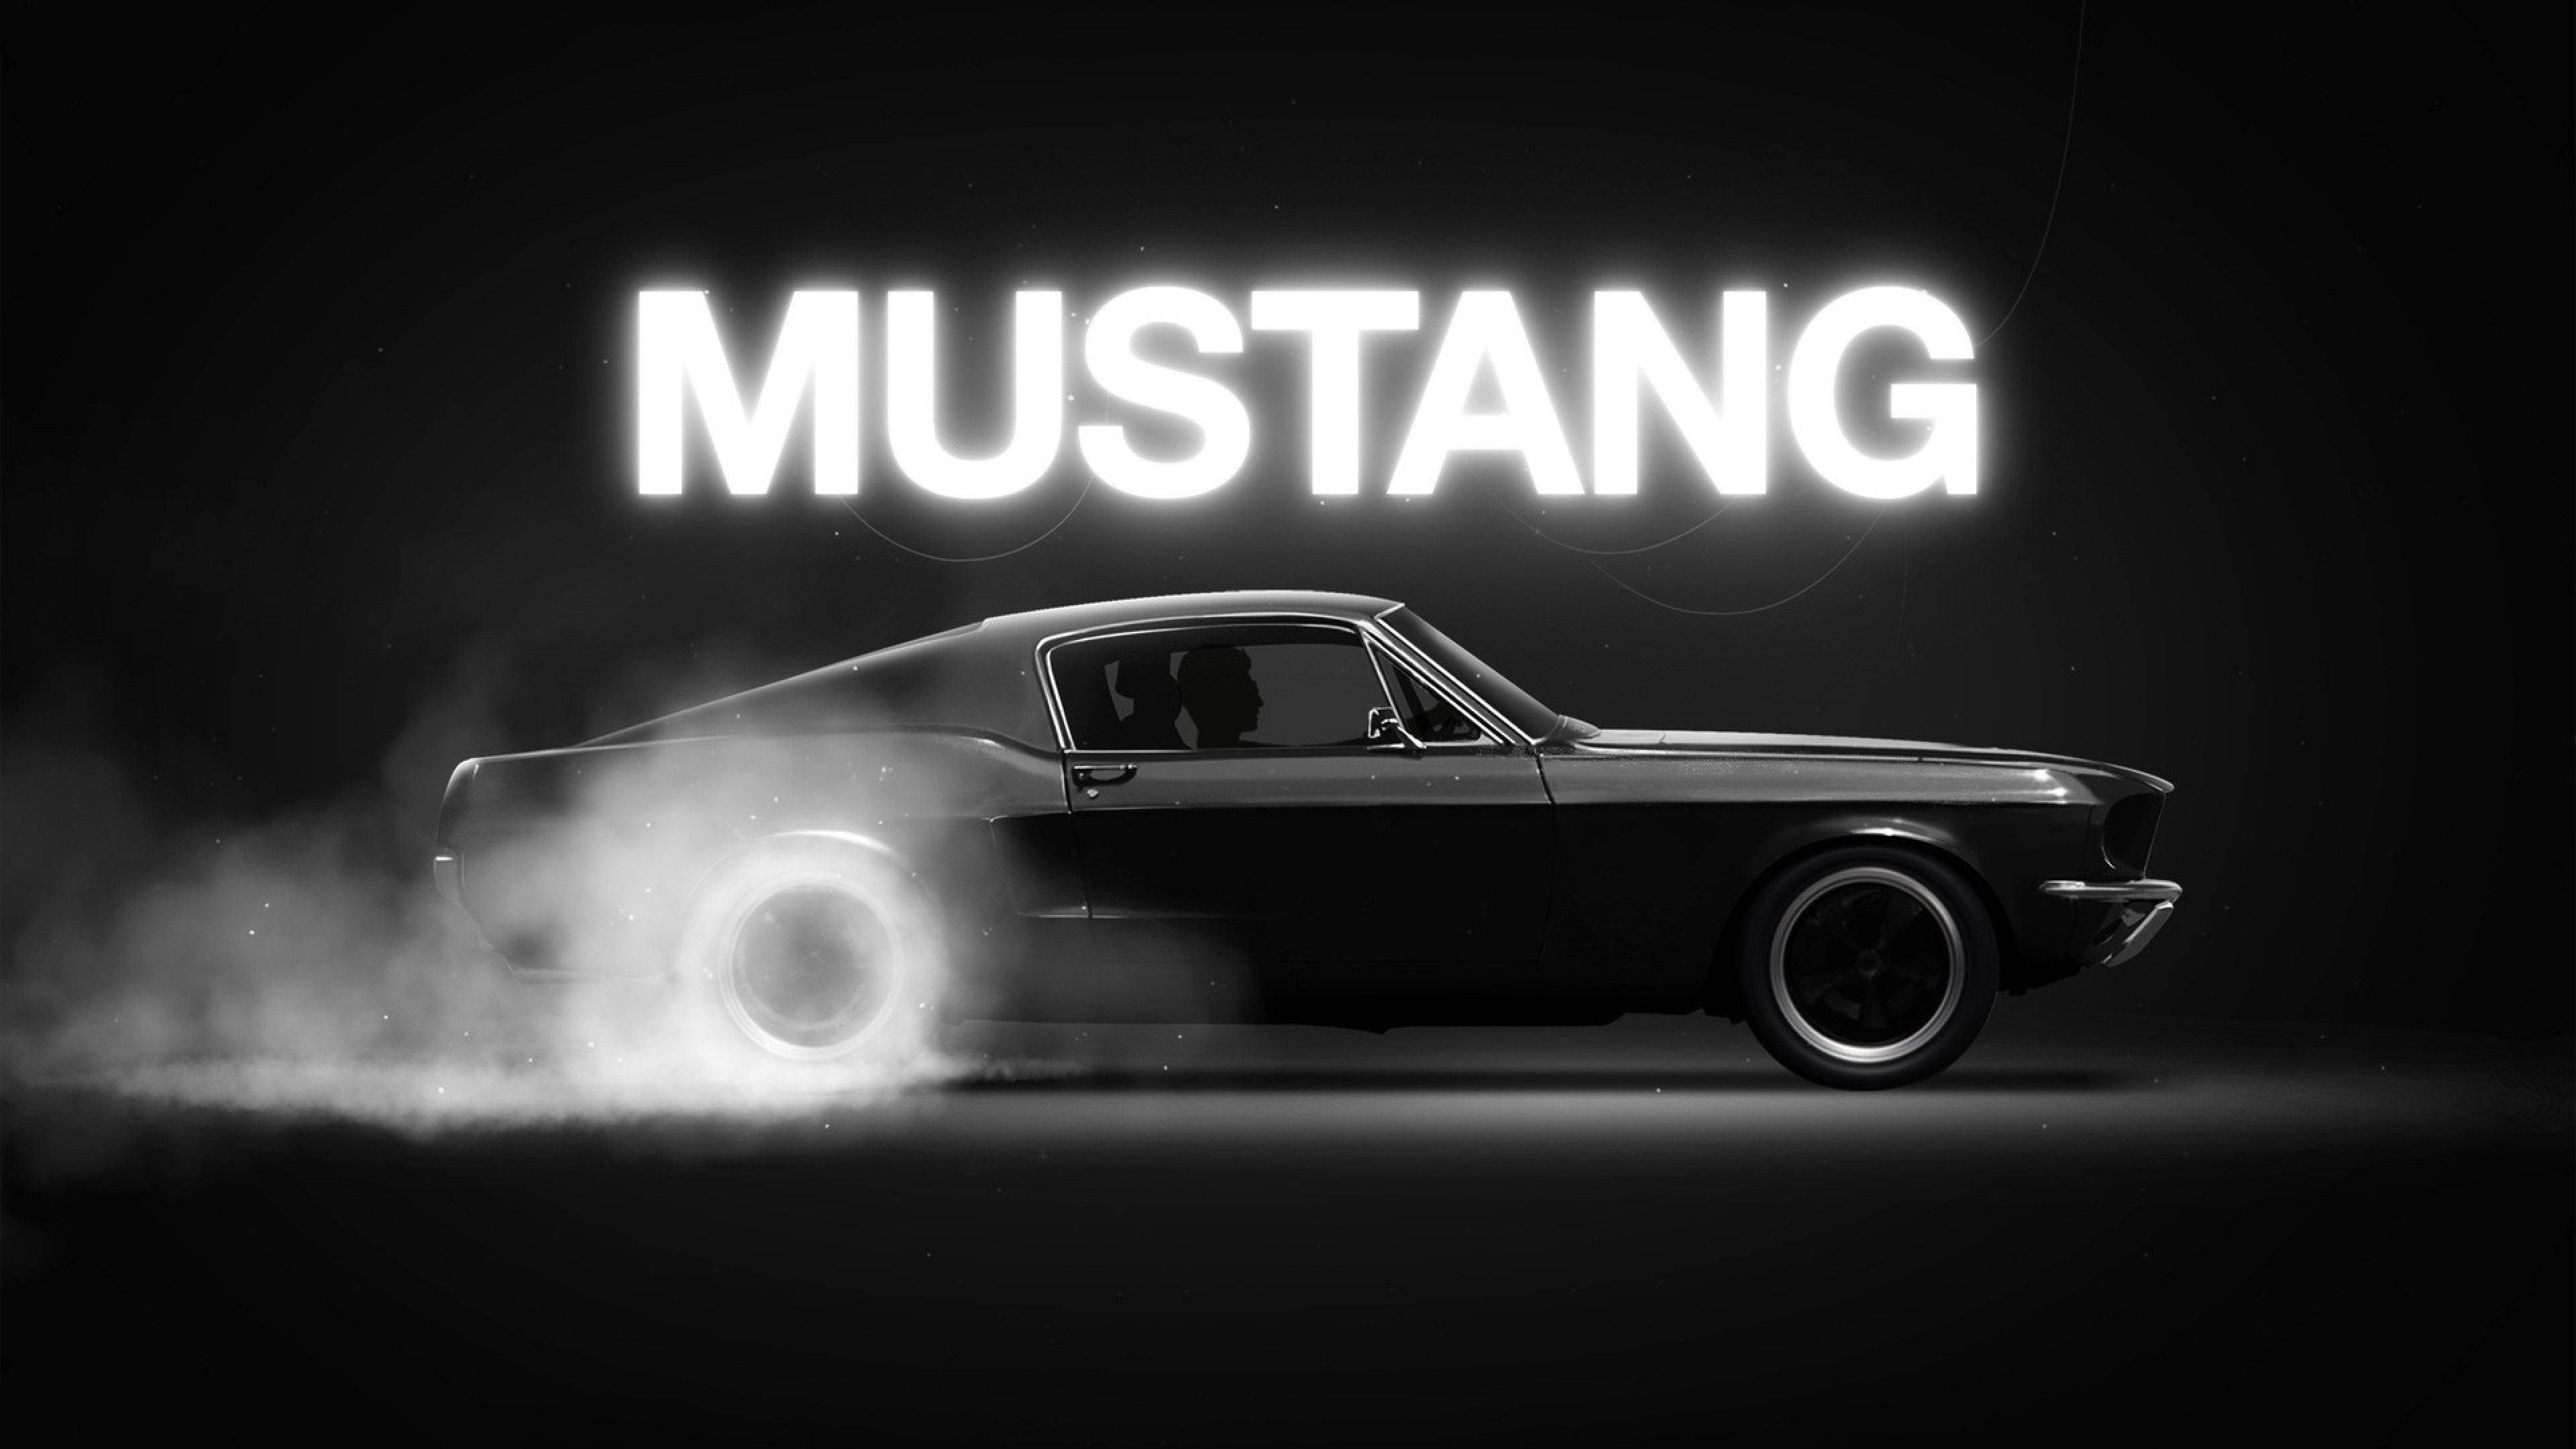 Download 3840x2160 Ford Mustang, Black, Smoke, Monochrome, Muscle